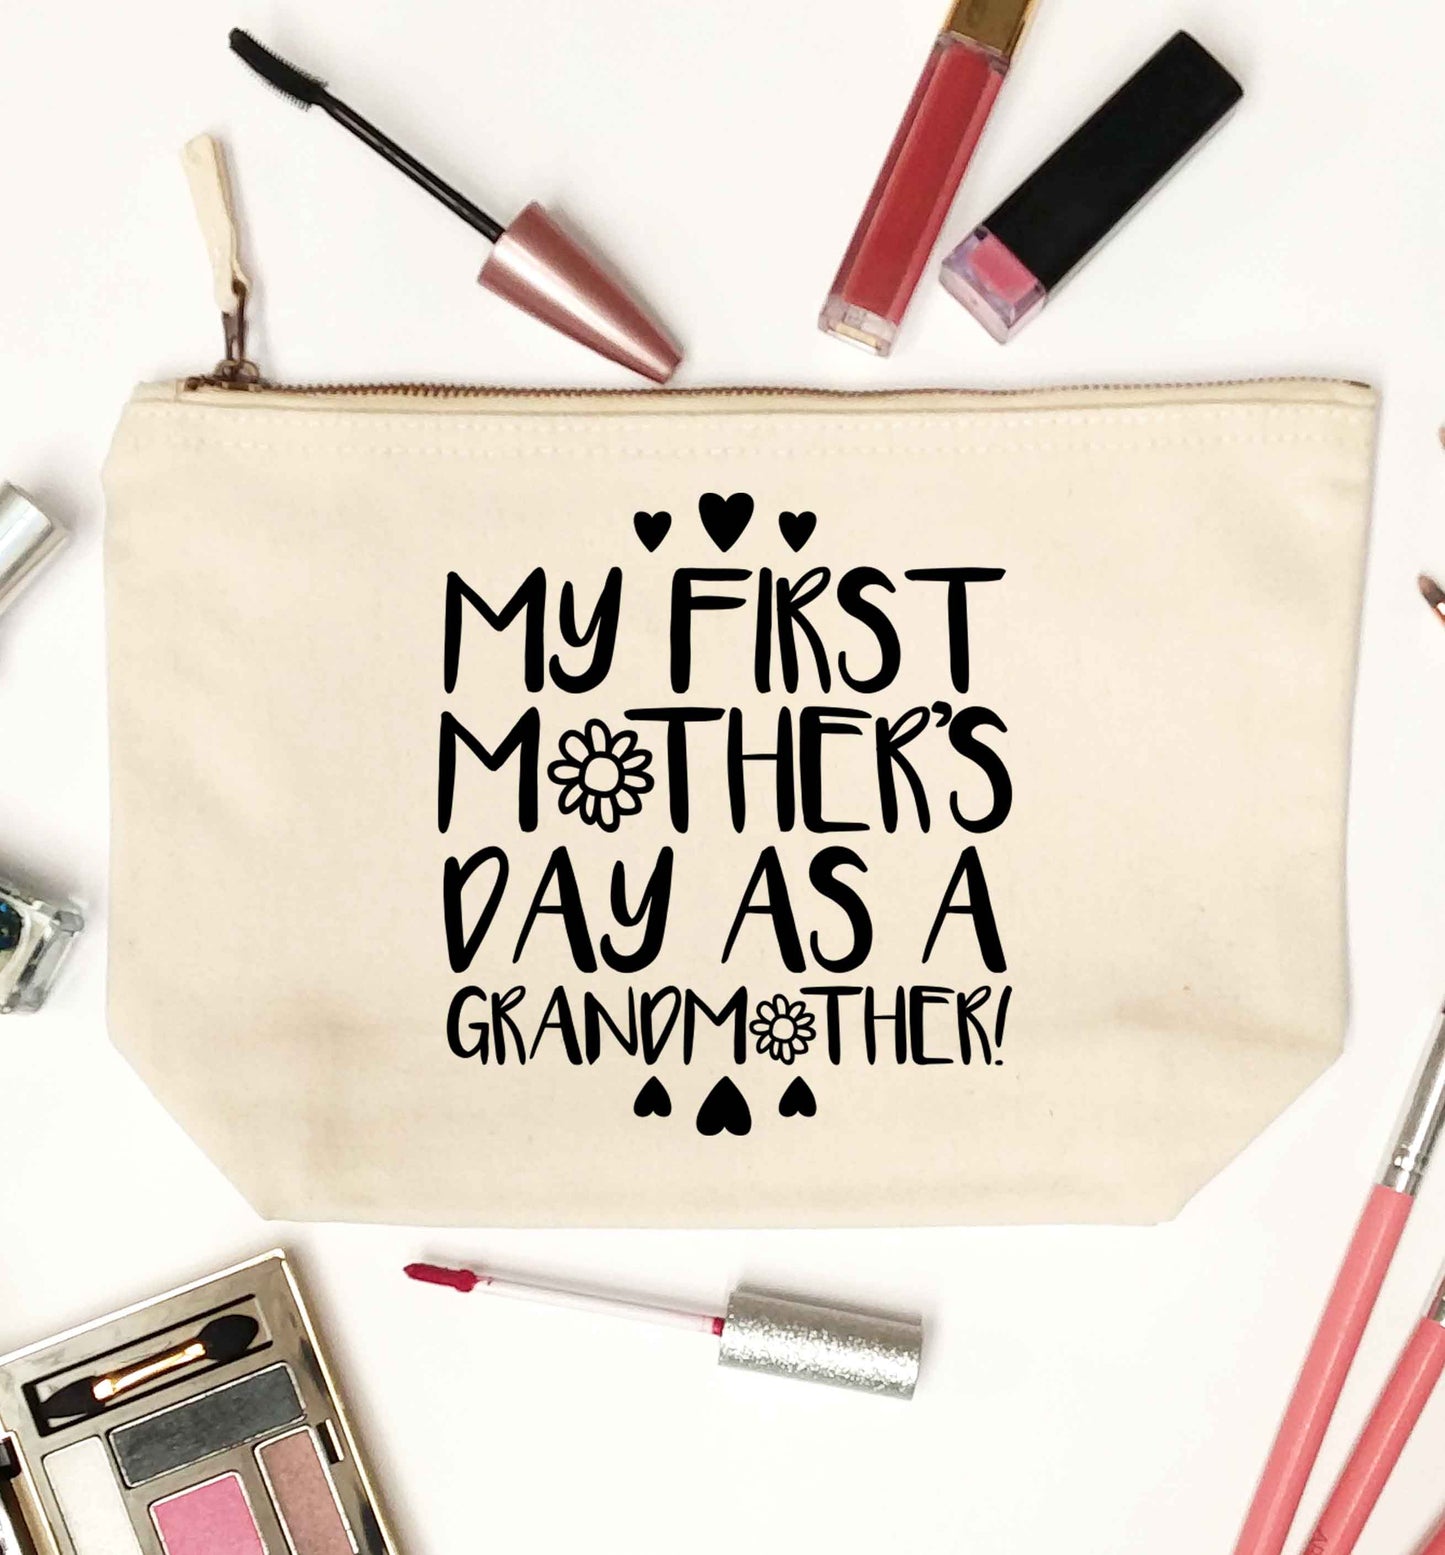 It's my first mother's day as a grandmother natural makeup bag